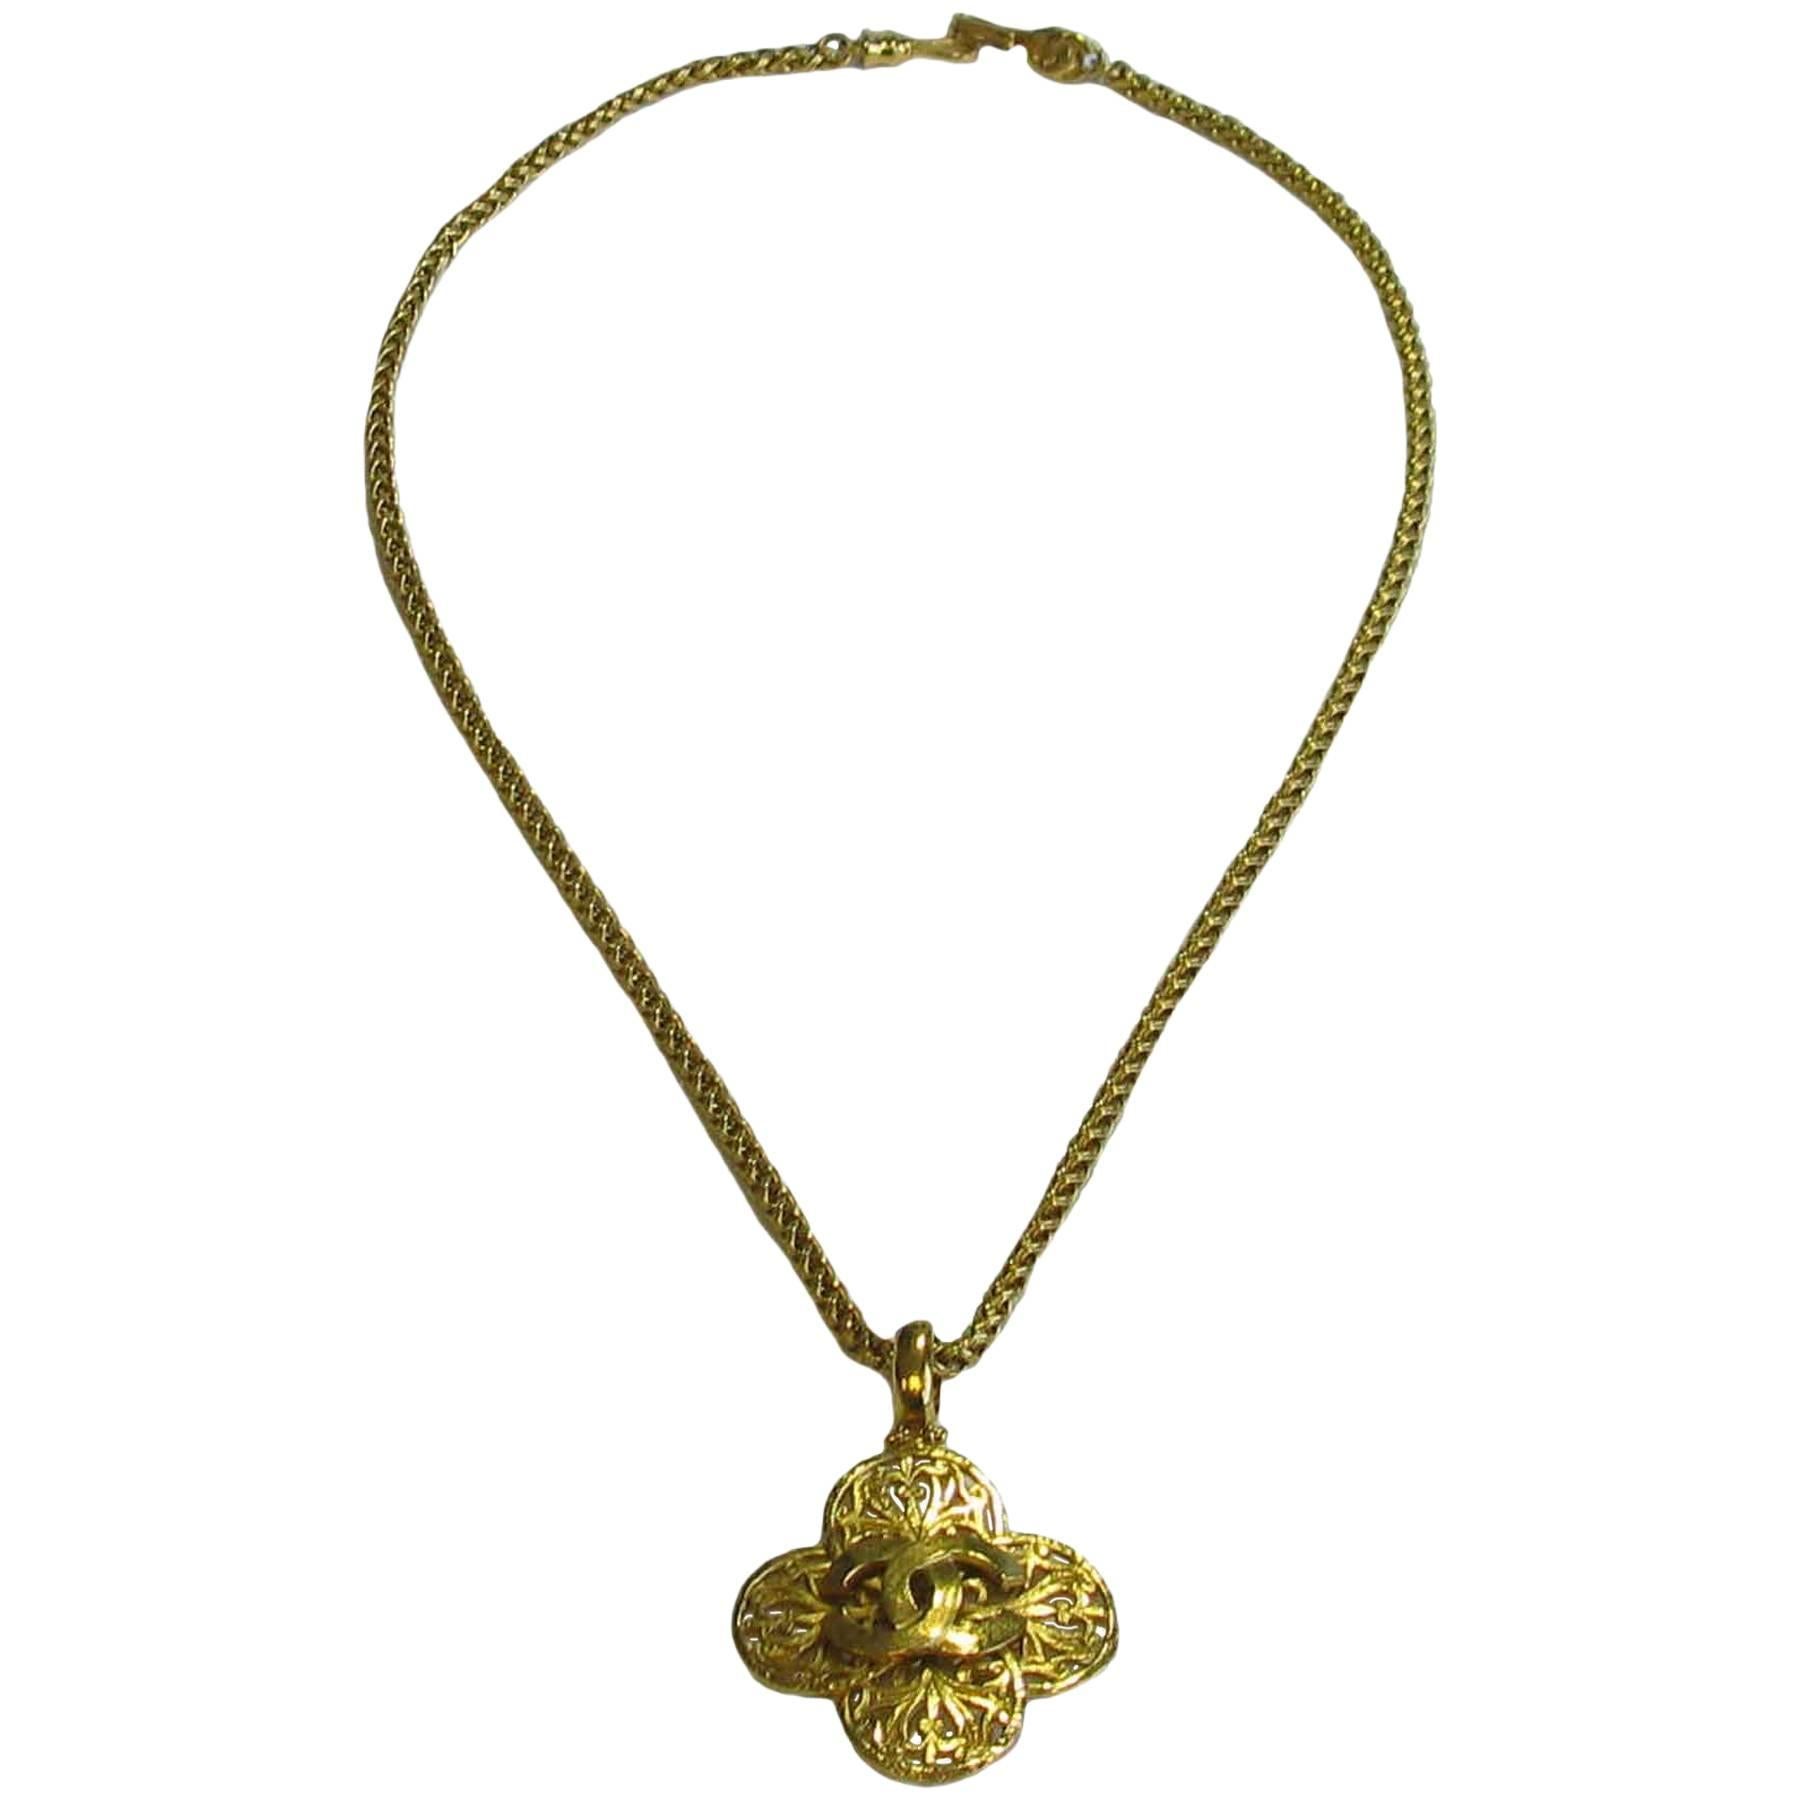 Vintage CHANEL Pendant Necklace Collection 1995 in Gold Metal